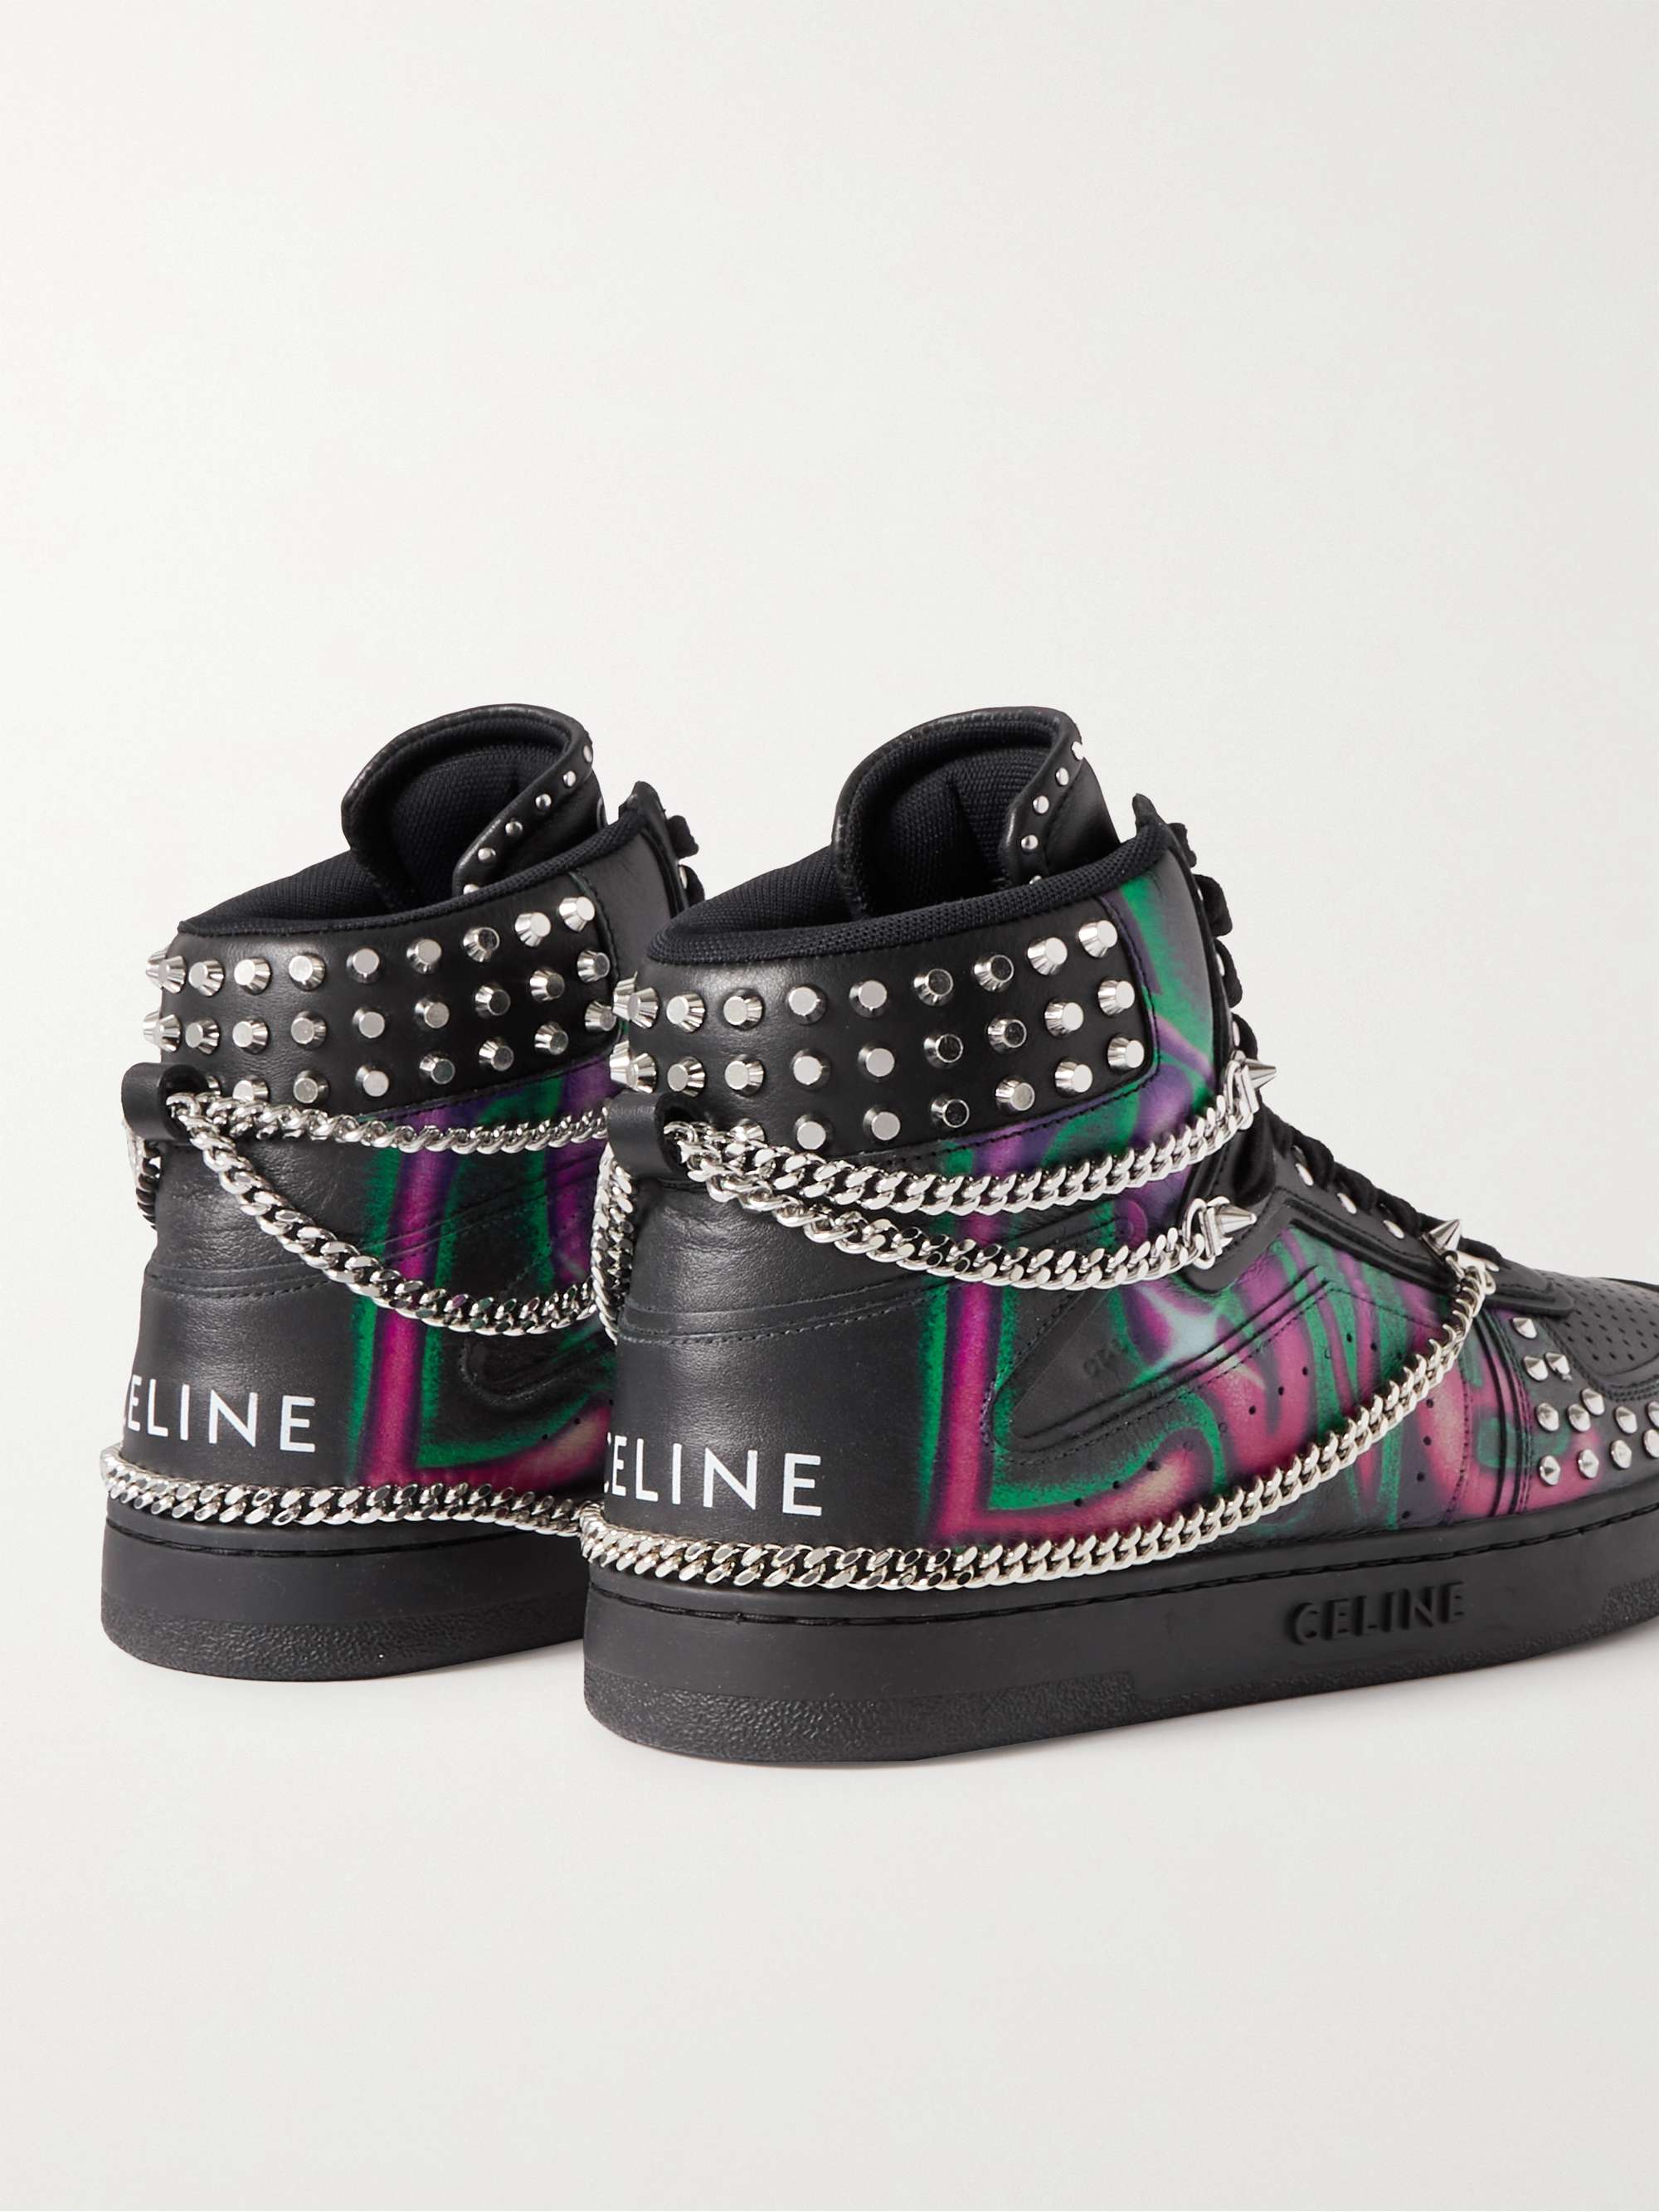 CELINE HOMME Z Stud Chain-Embellished Printed Leather High-Top Sneakers